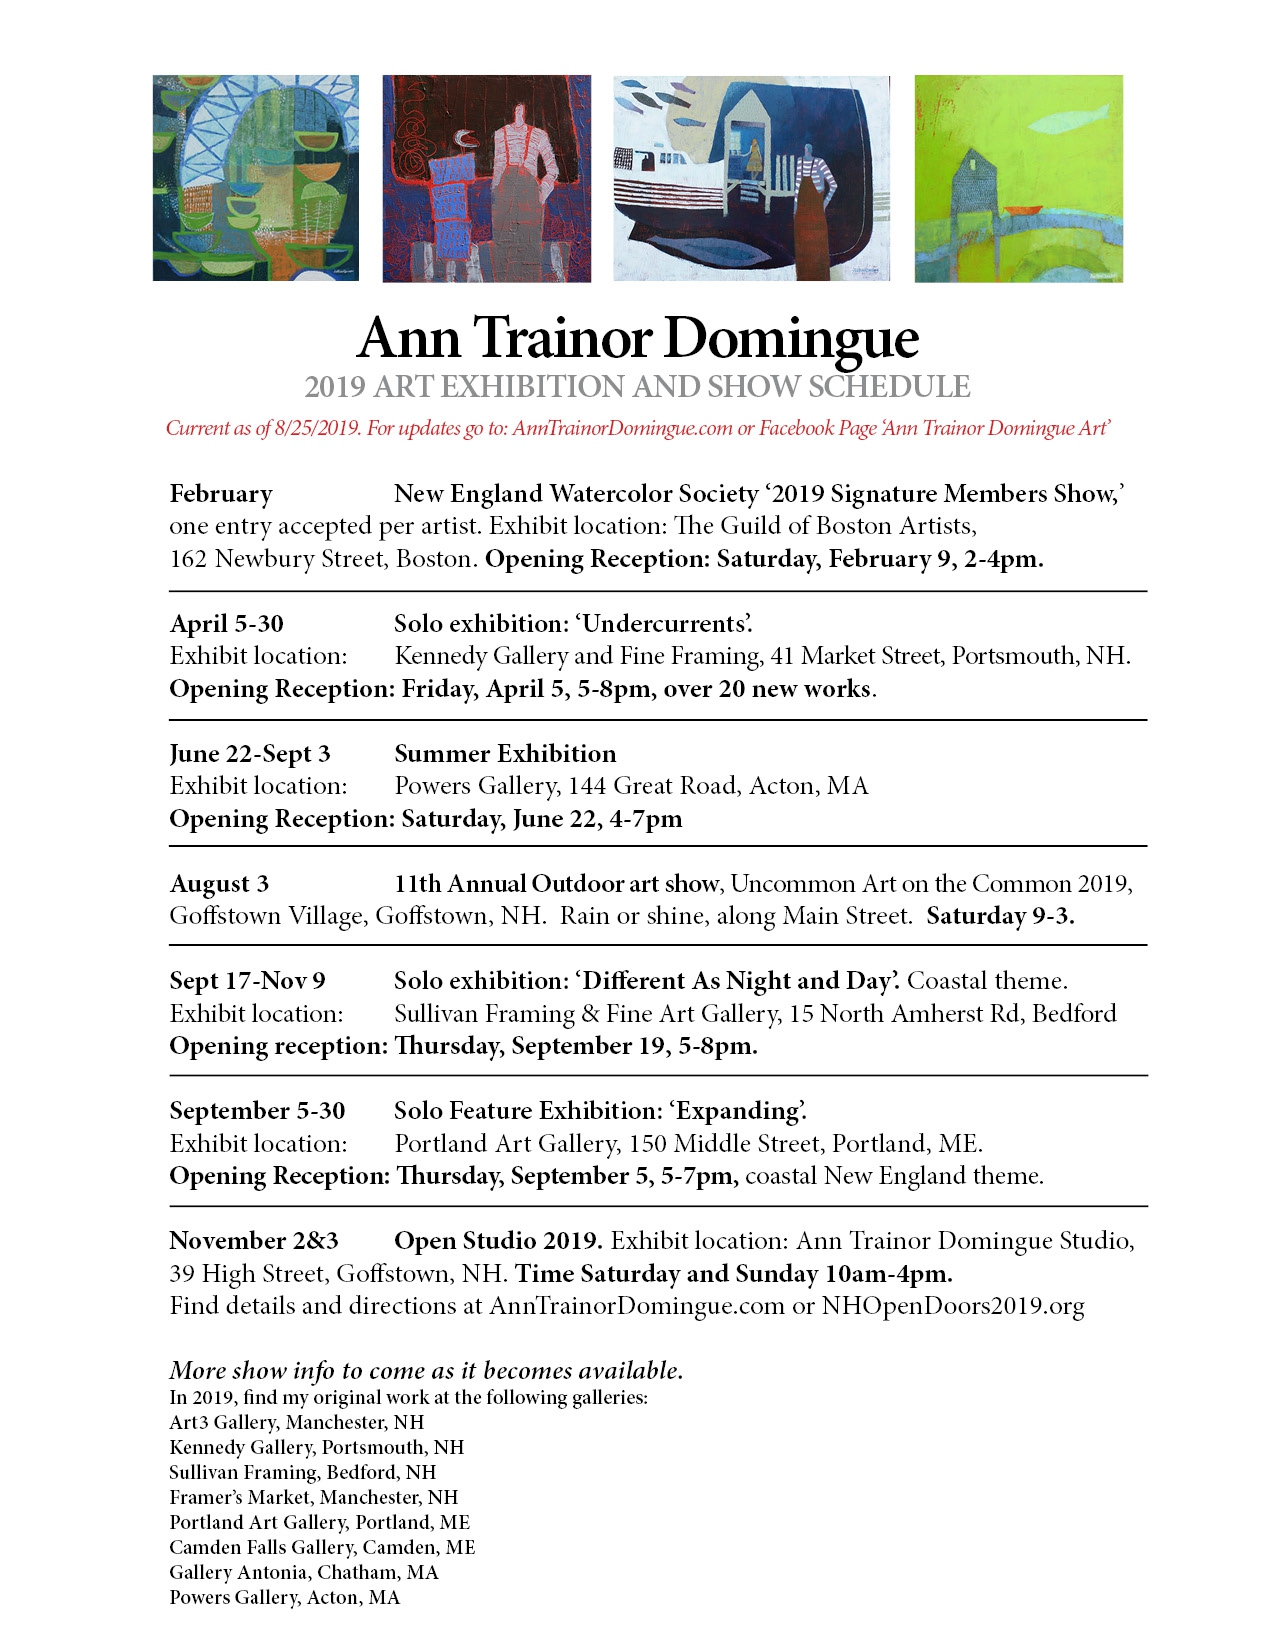 Click here to view show sched aug 2019 by Ann Trainor Domingue